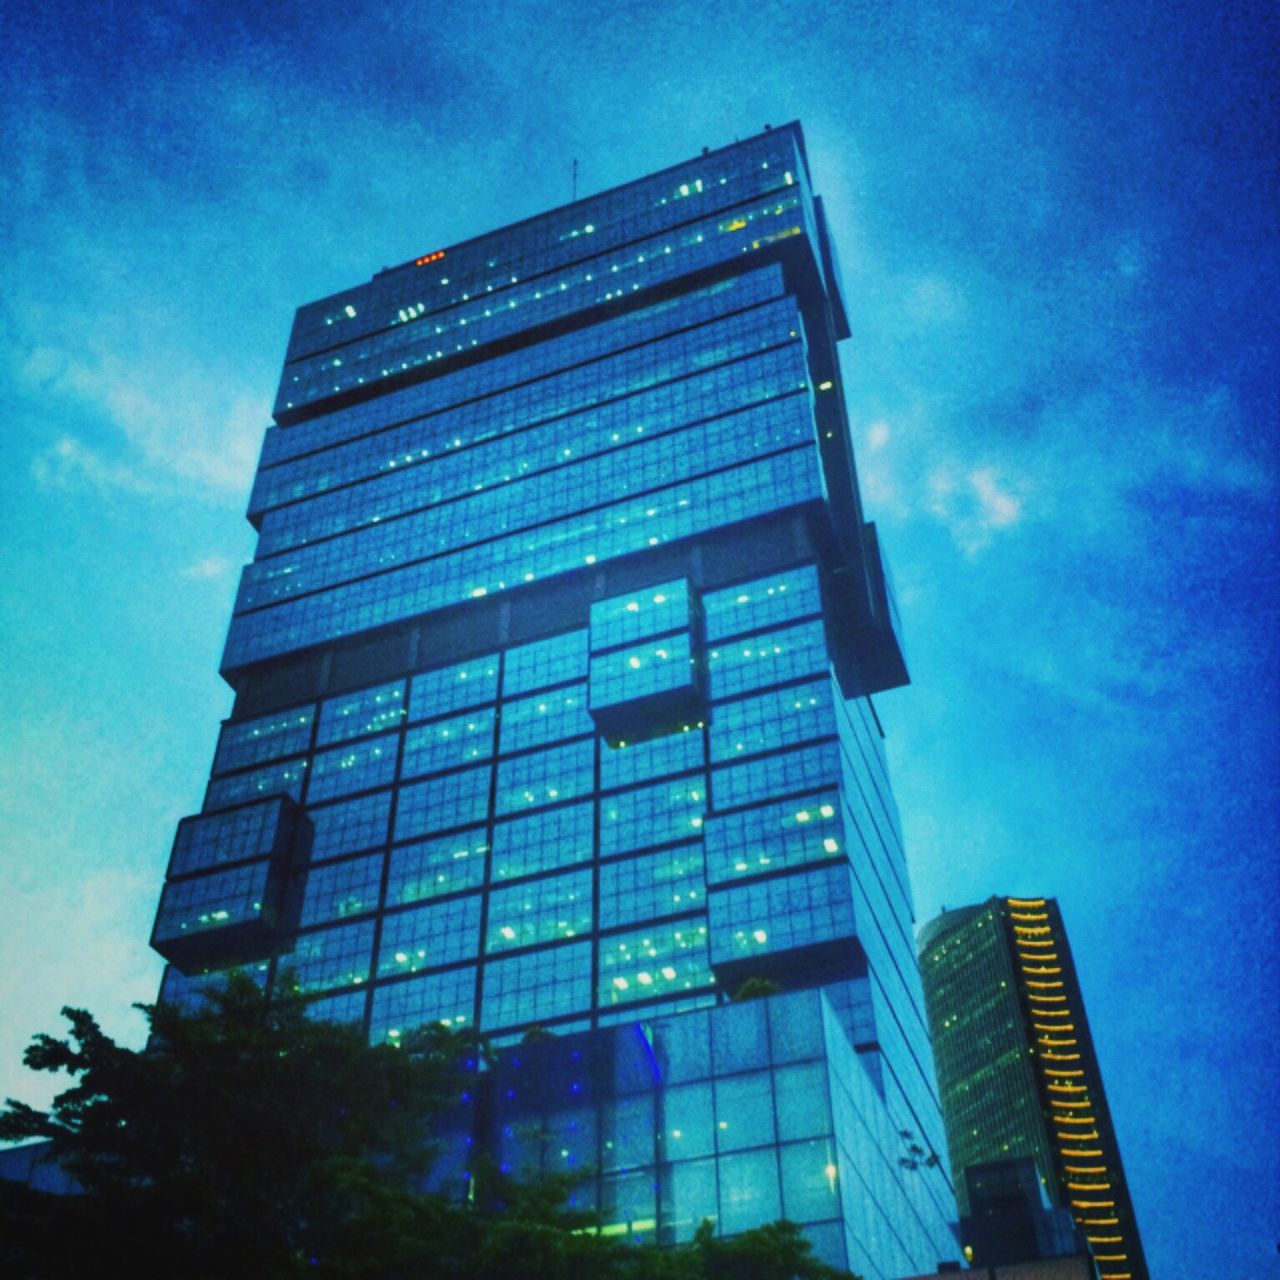 architecture, building exterior, low angle view, built structure, modern, skyscraper, office building, tall - high, city, sky, tower, building, glass - material, reflection, blue, tall, cloud - sky, cloud, no people, outdoors